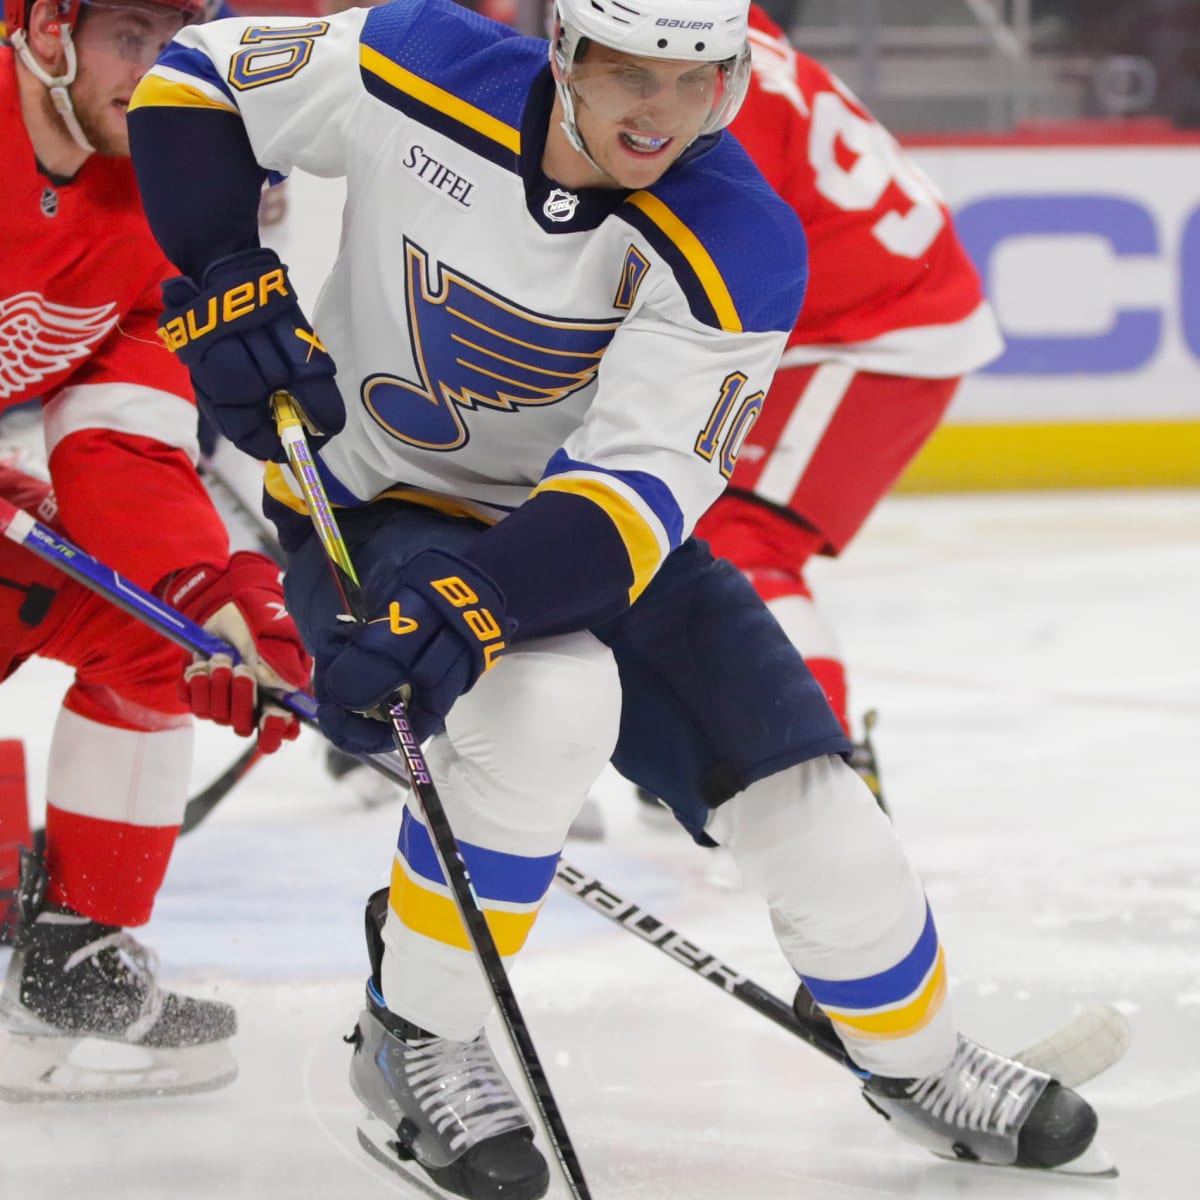 It's All About The St. Louis Blues For Hockey And St. Louis